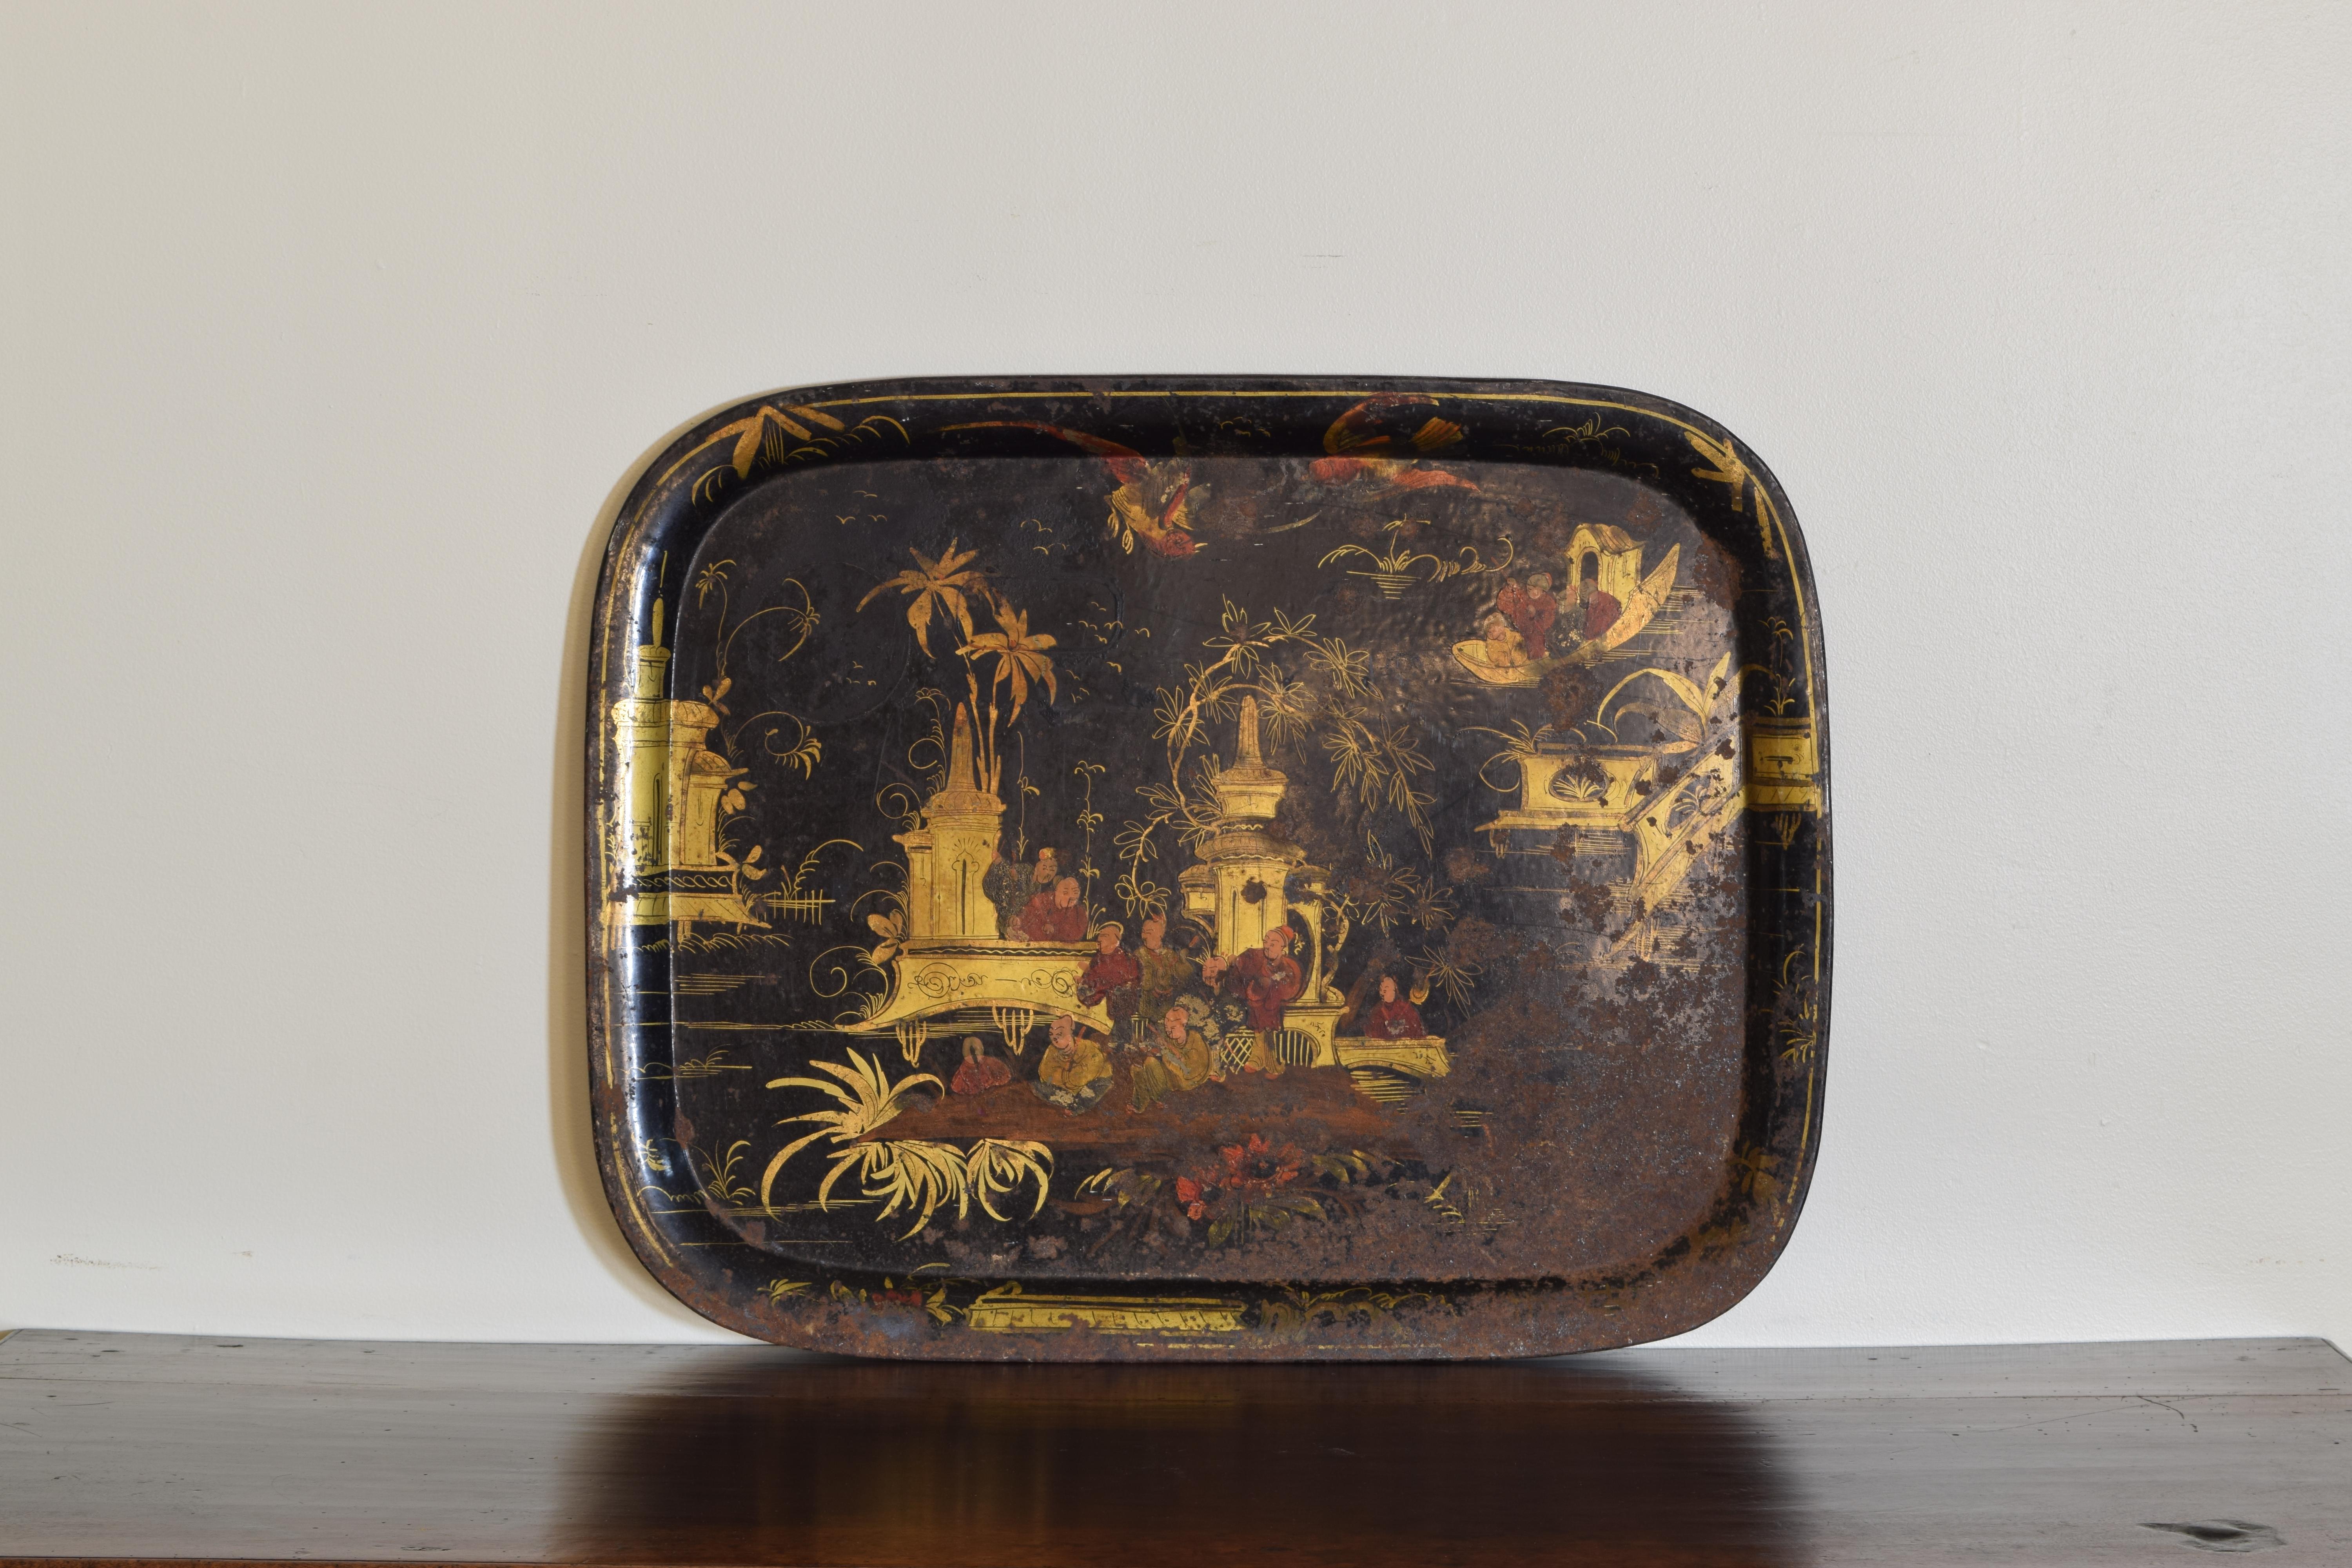 Rectangular with raised outer edge, decorated in faded paint of a chinoiserie theme.